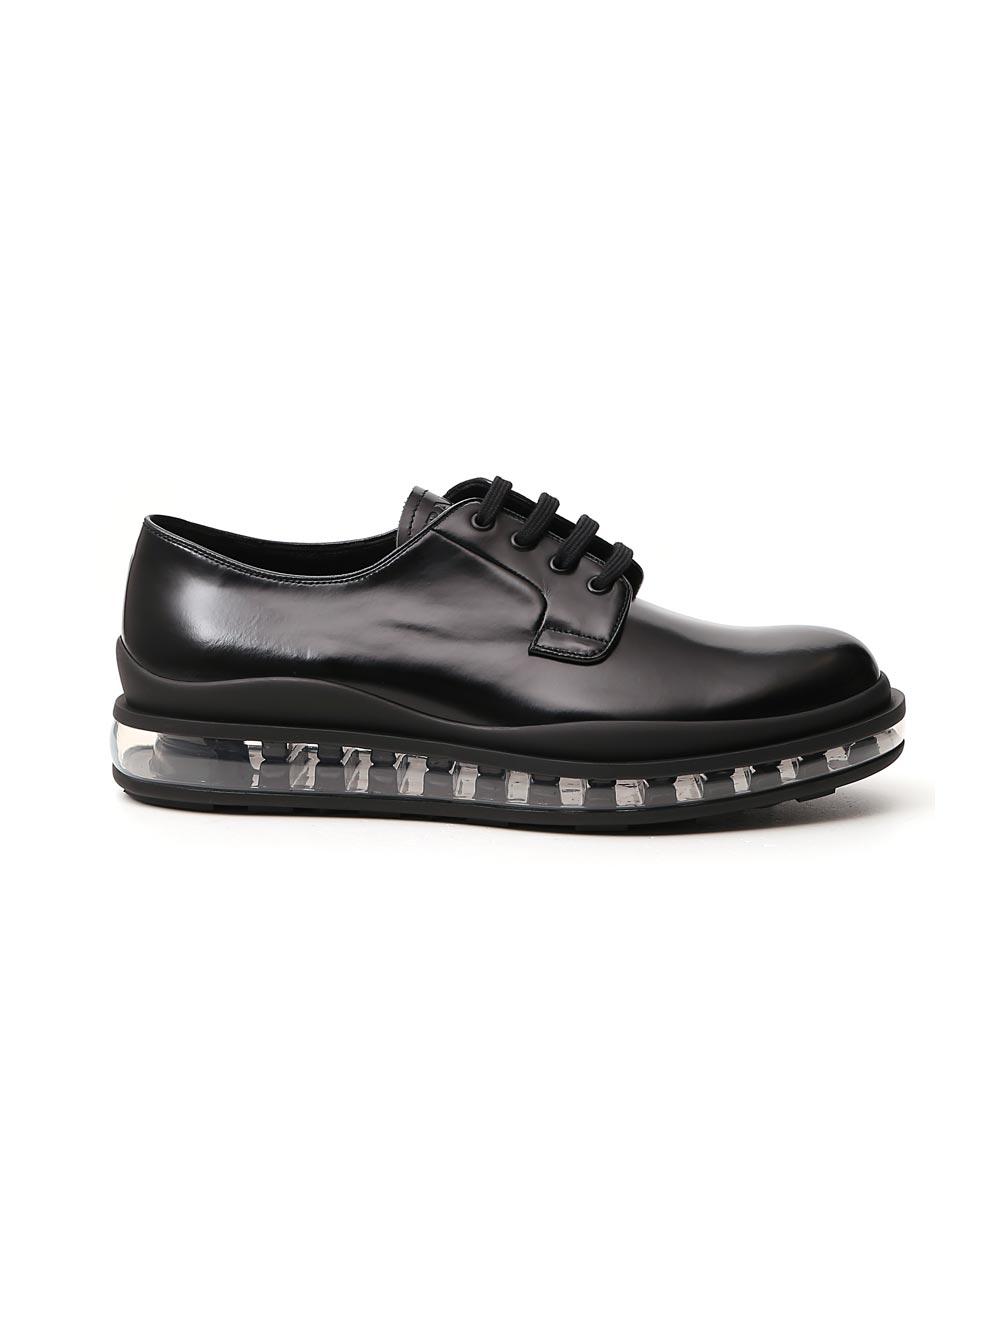 Prada Leather Lace-up Derby Shoes in Black for Men - Lyst